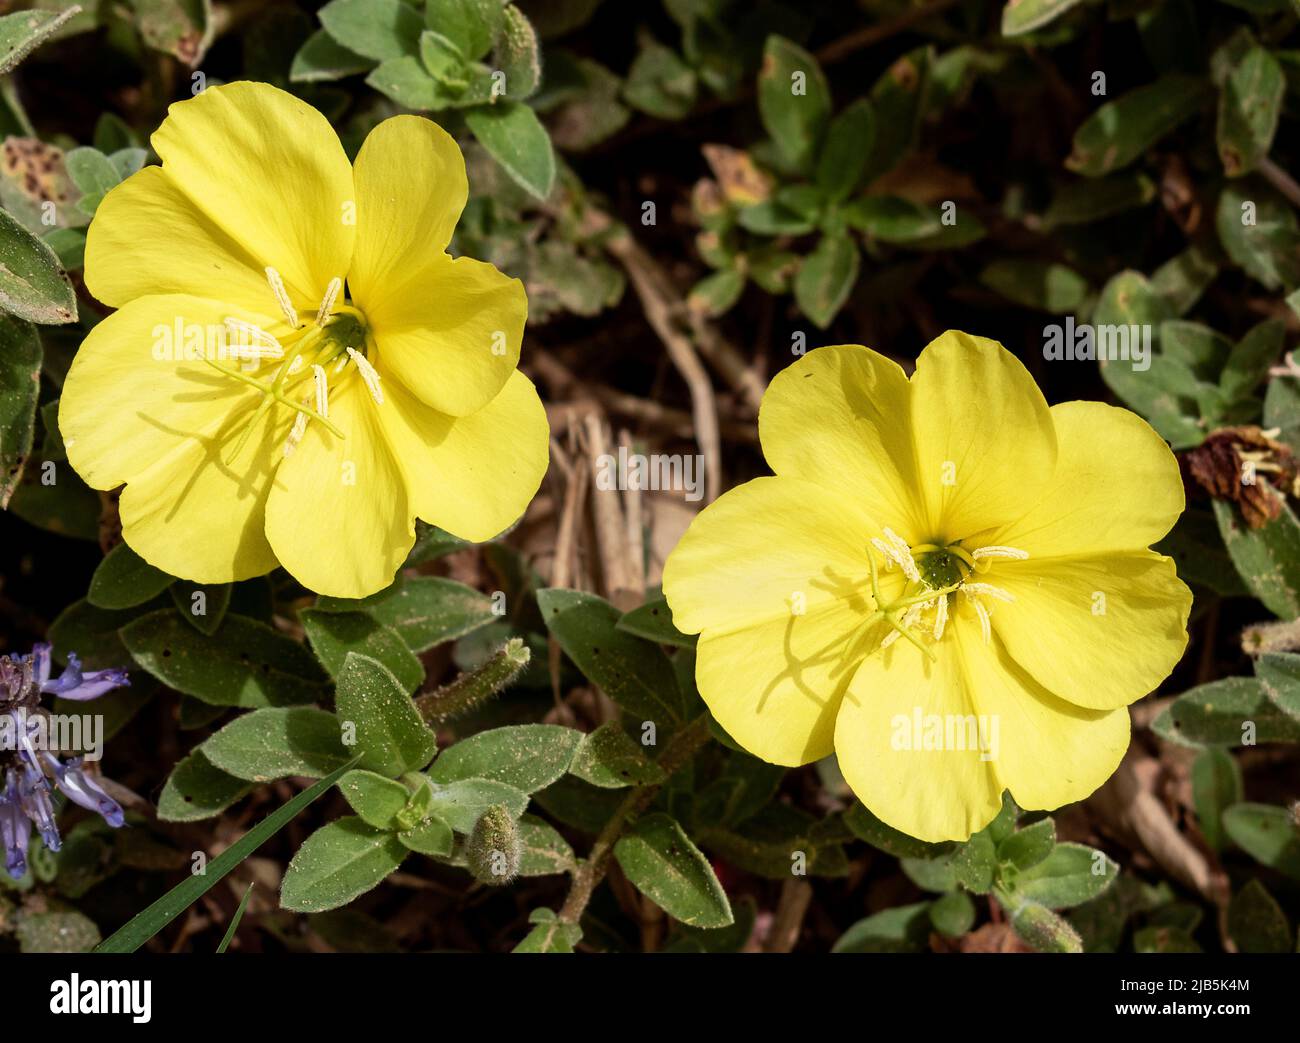 two perfect bright yellow primrose flowers surrounded by leaves and other groundcover vegetation Stock Photo